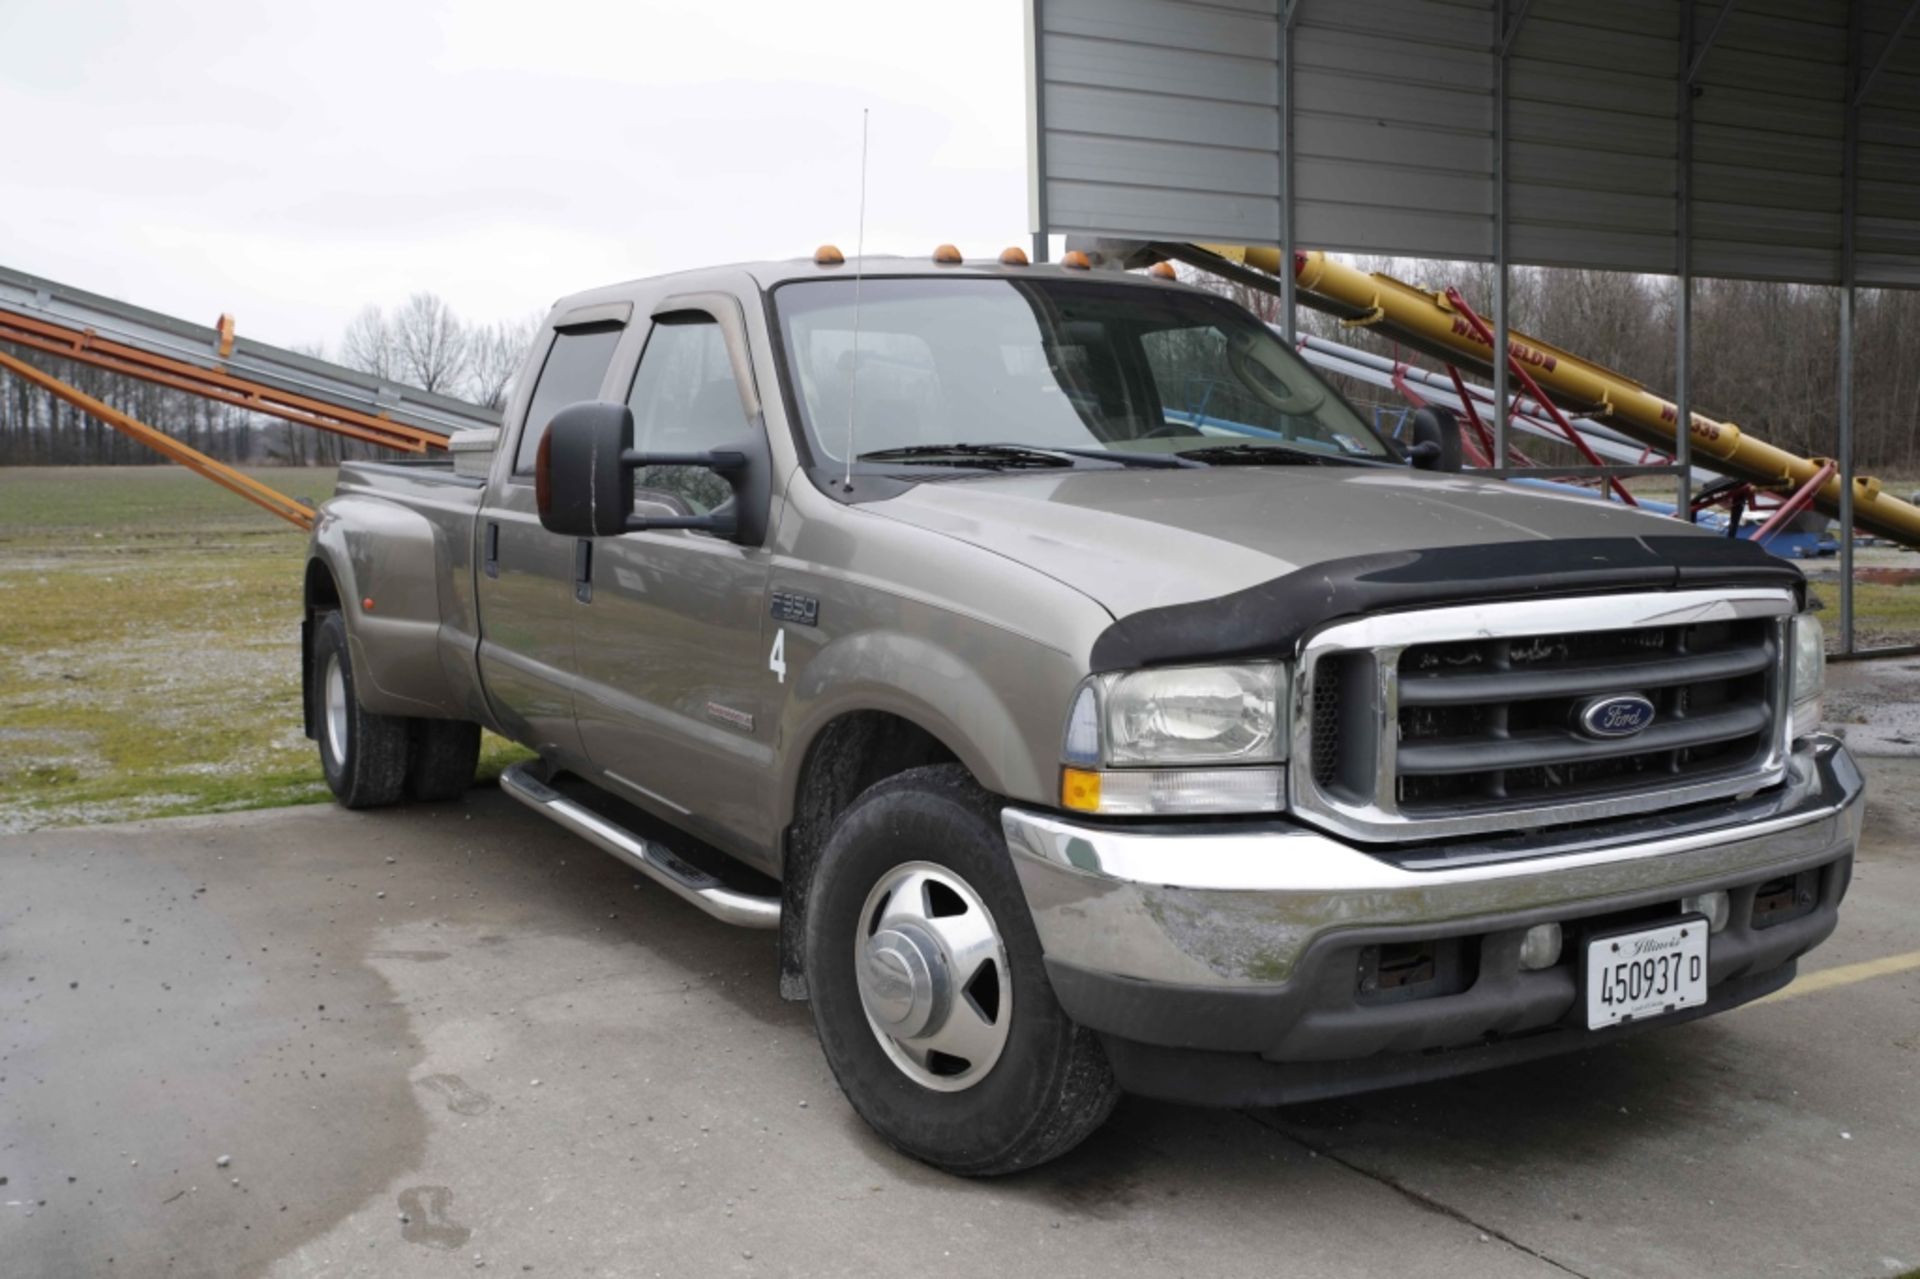 2004 Ford F-350 XLT 2wd 6.0L Powerstroke Diesel Engine - Image 2 of 22